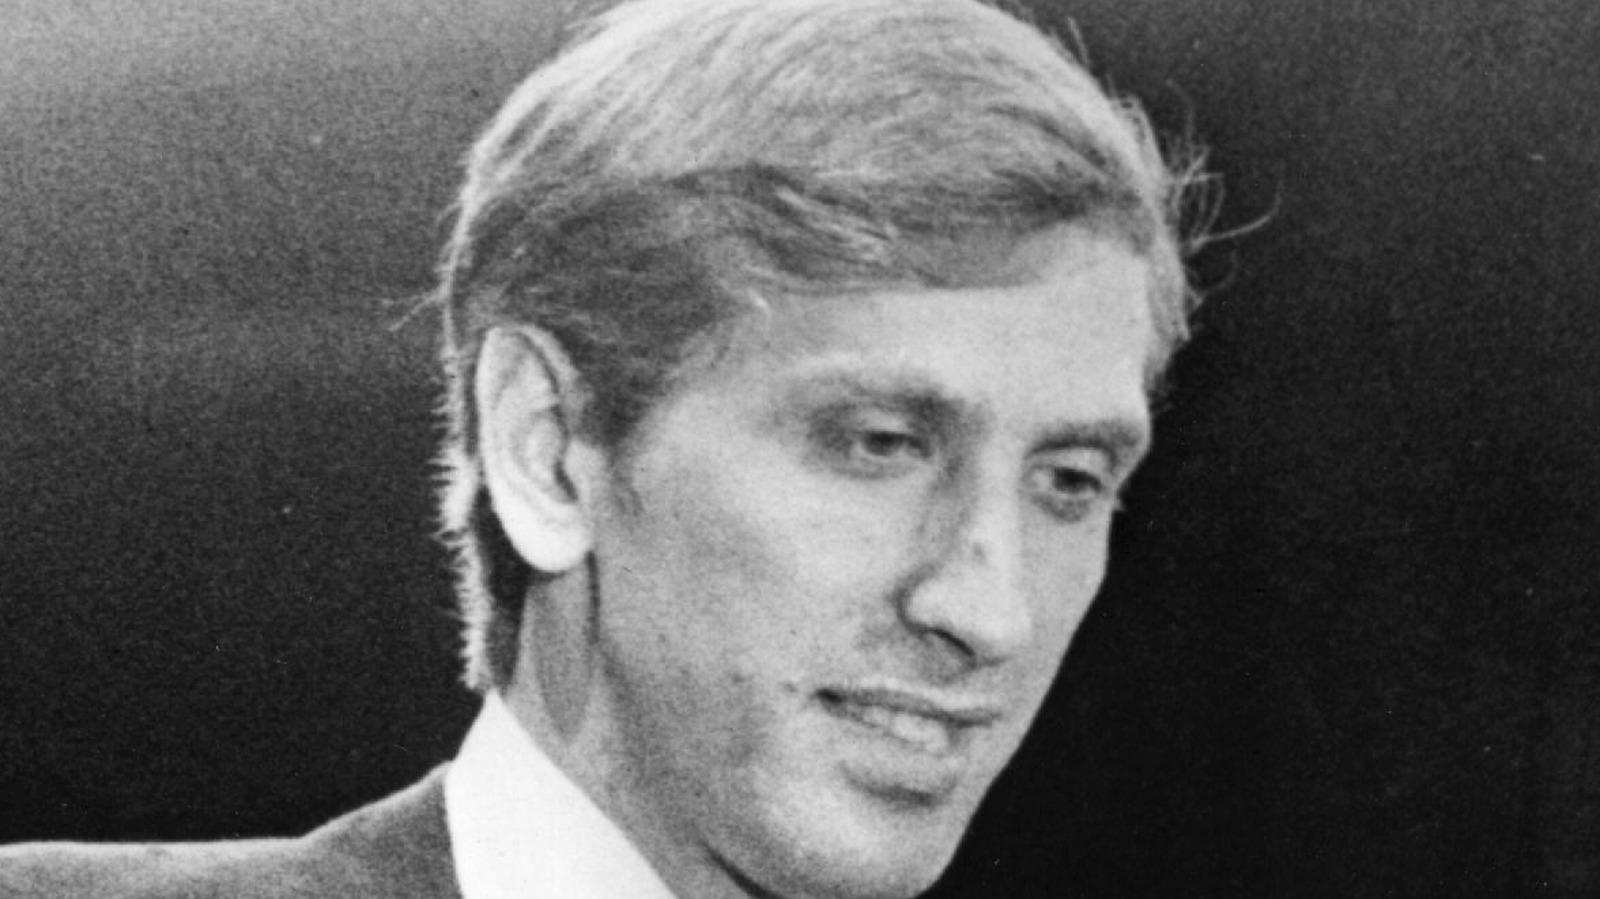 What is Bobby Fischer famous for? - Quora